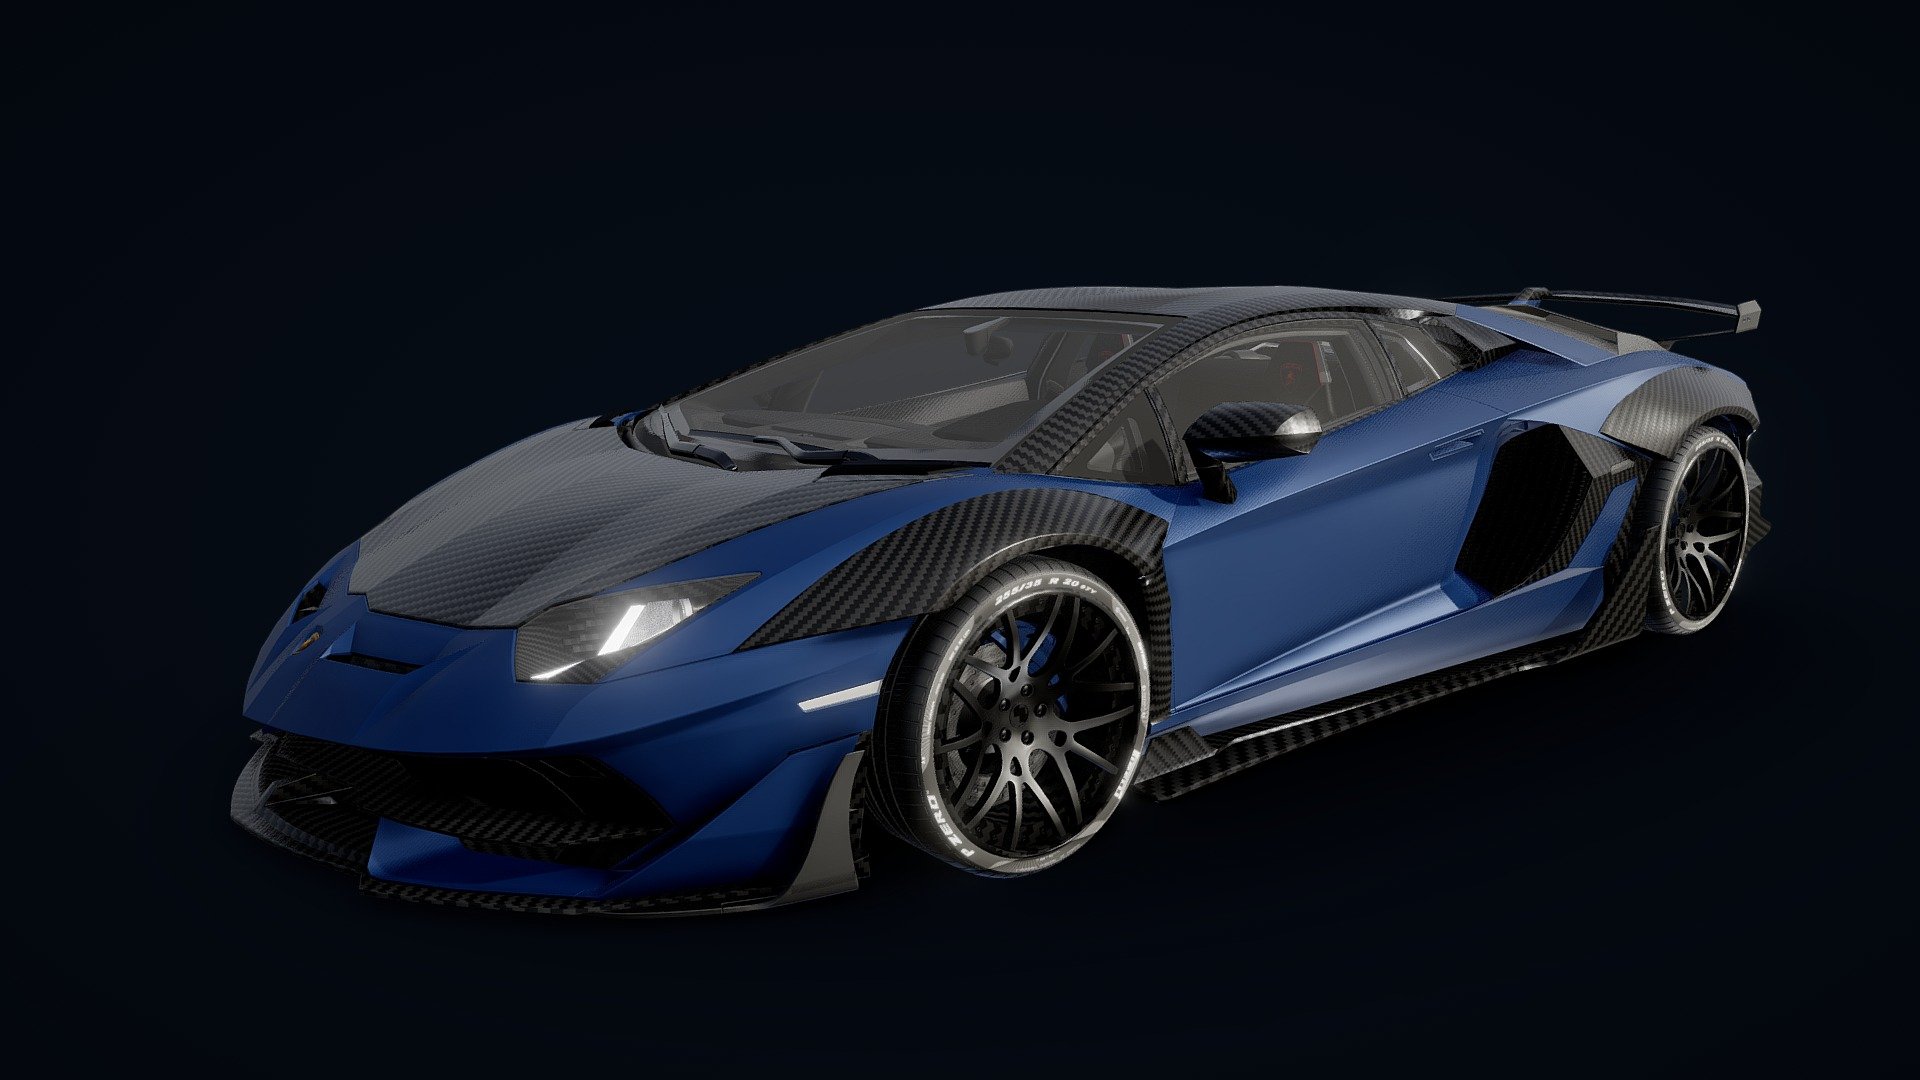 I know.. again the same model..
But this time with added interior!

Interior
https://sketchfab.com/3d-models/lamborghini-aventador-svj-blender-300-5933b82a092c4d6e82696bd380ada8c5by
from https://sketchfab.com/ultramirage10

Exterior
https://sketchfab.com/3d-models/aventador-svj-black-ghosttm-412e5ba4c1264a4fab97660ebc0695a4 
from https://sketchfab.com/3Duae

It got very messy with these two high detail models which both are not from me. But I didn't want to spend more time on this, as I don't have any plans with the model. I just think the Car looks cool :]
Also I am personaly more interestet in mid poly models with a efficient use of polys 3d model